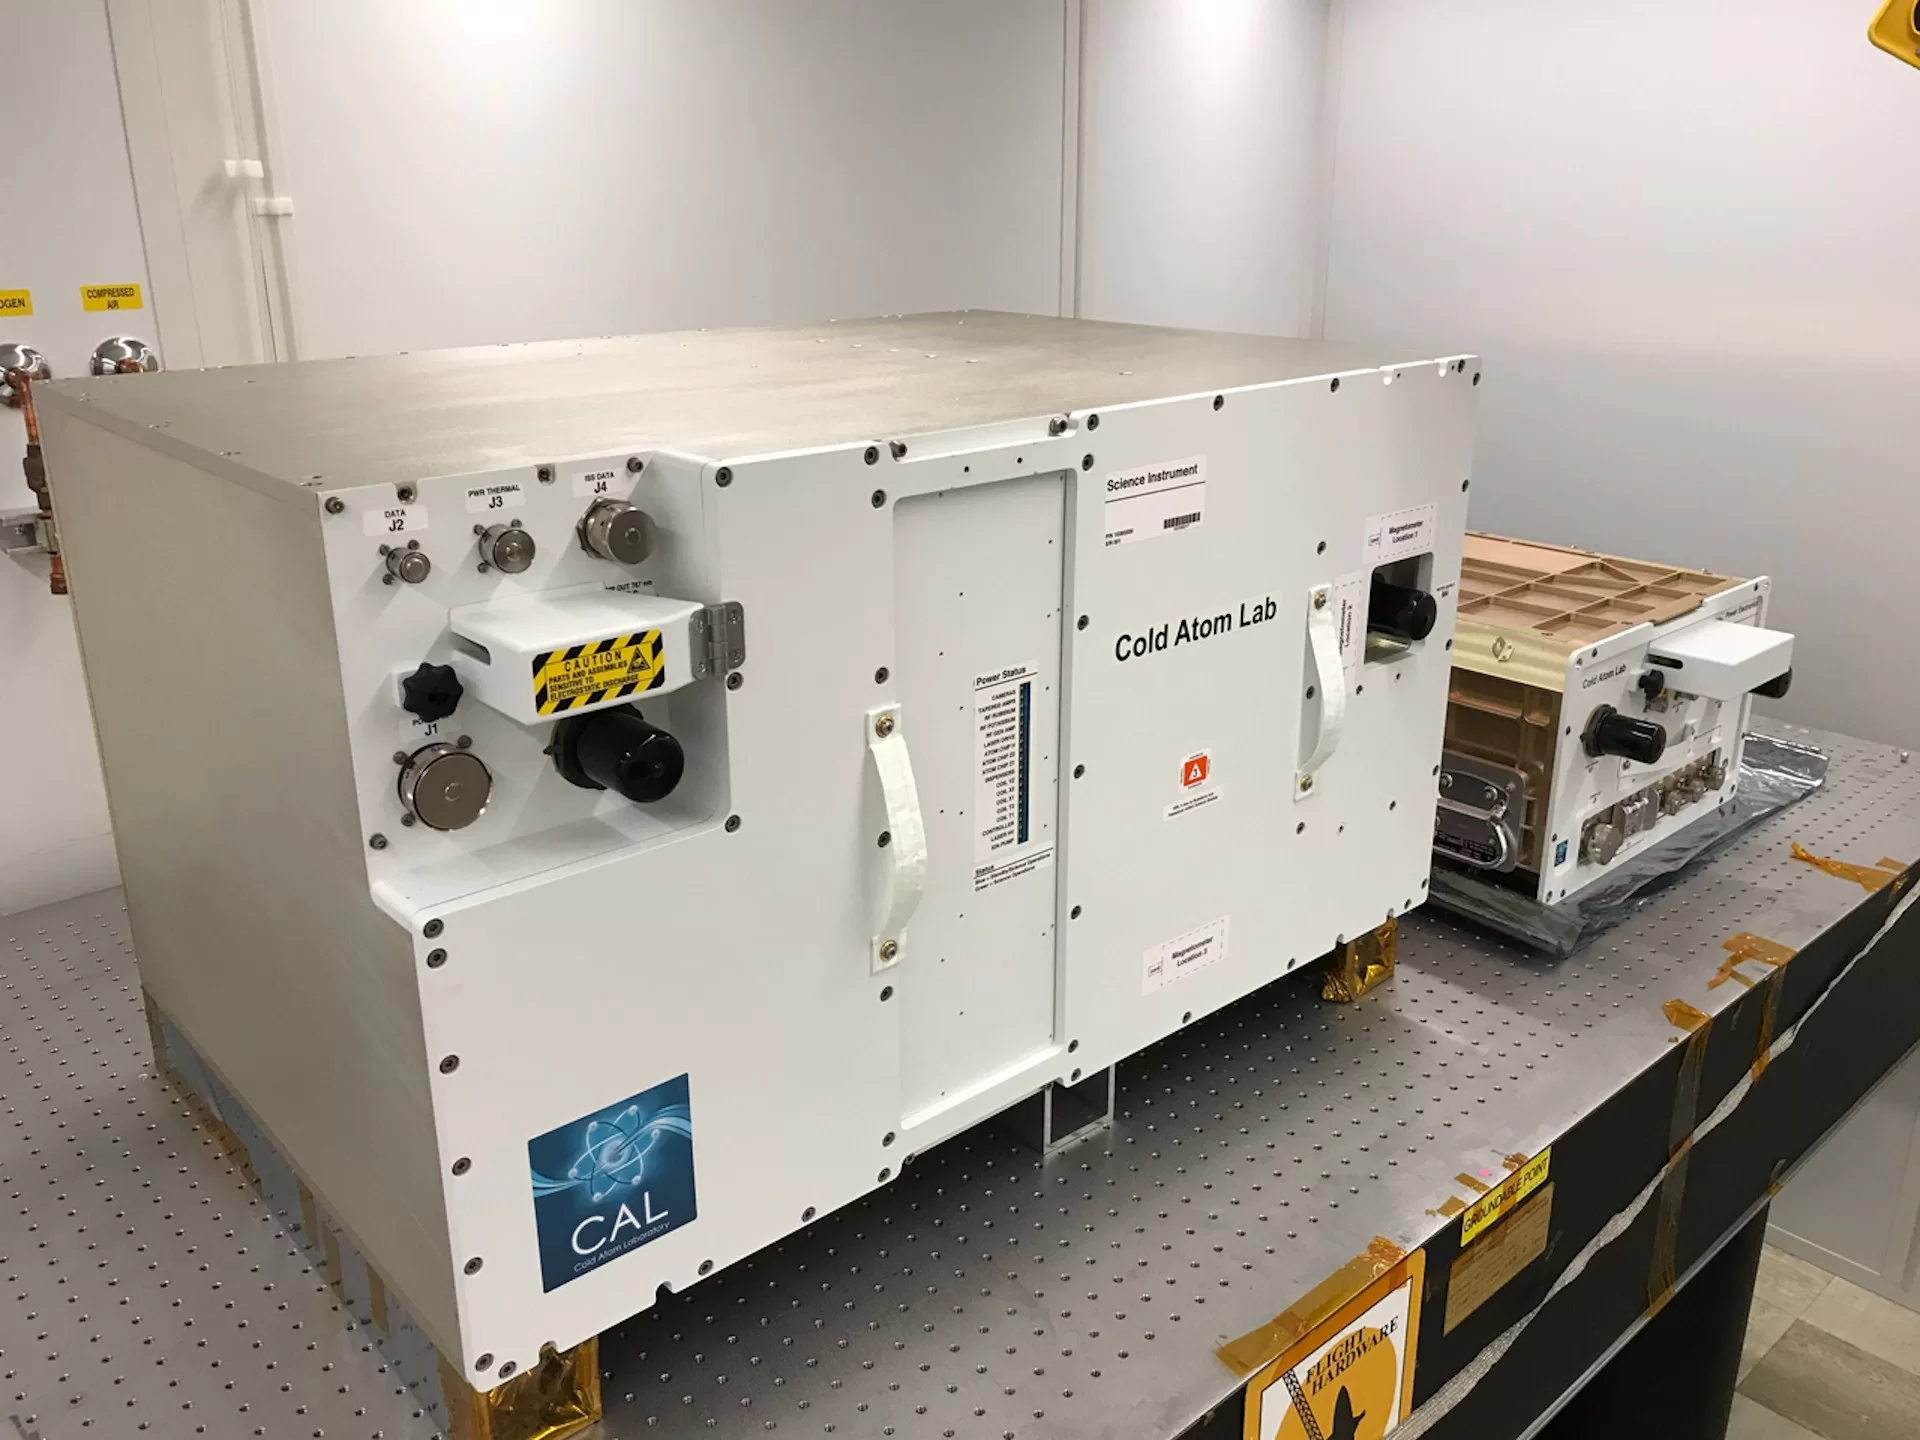 Seen before its 2018 launch to the International Space Station, the Cold Atom Laboratory comprises two containers, that larger of which contains the lab's "physics package," where experiments requested by Bates physicist Nathan Lundblad on ultracold atoms takes place. (Photograph courtesy of the Jet Propulsion Lab)